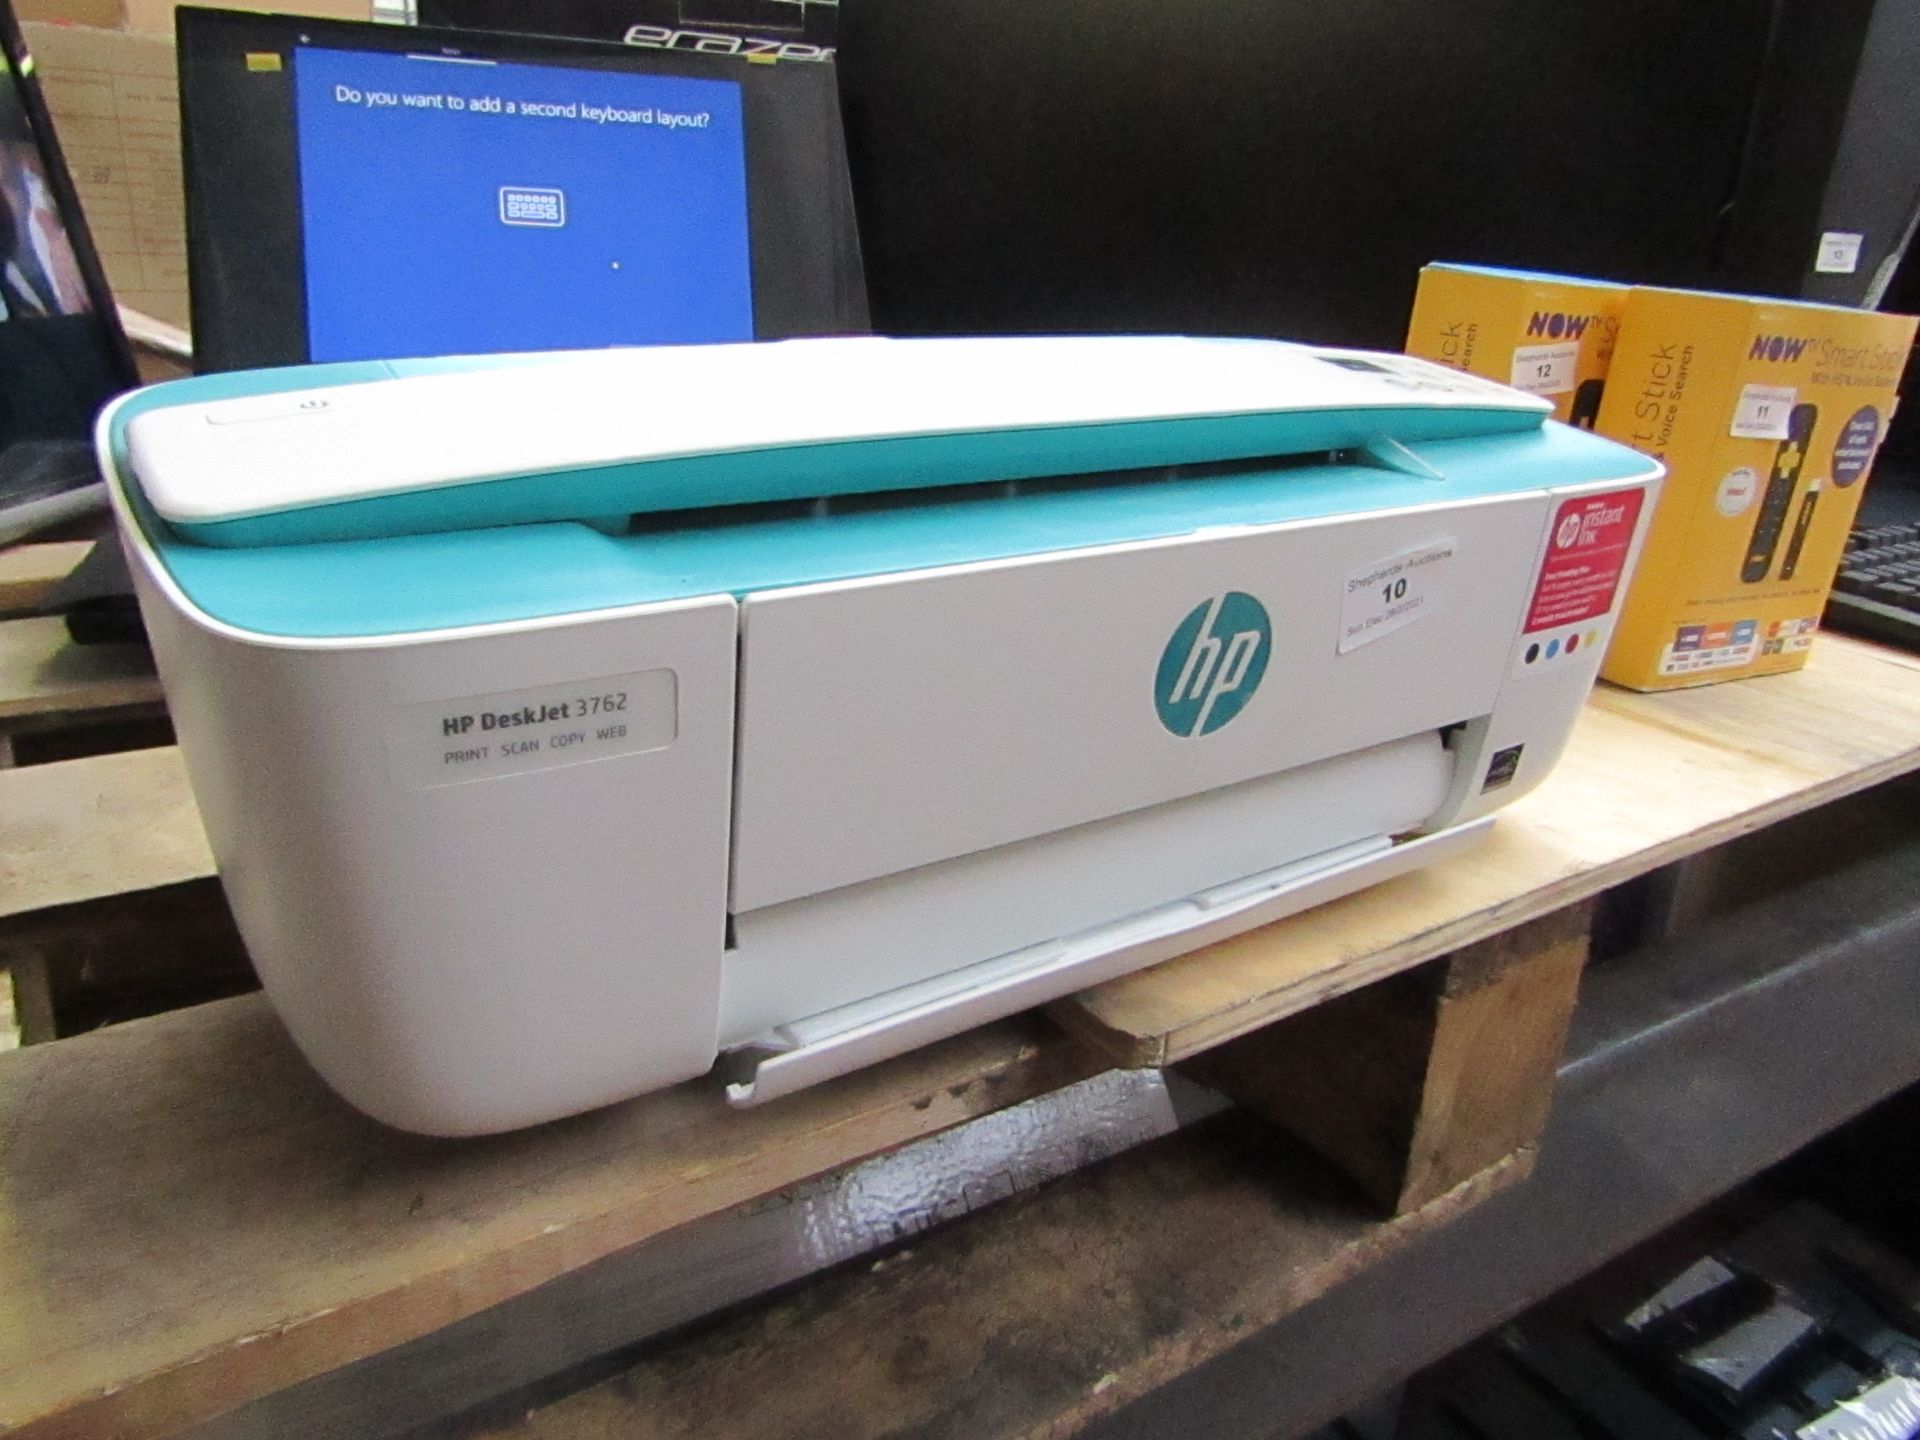 HP Deskjet 3762 print,scan,copy, web compact printer, powers on but not checked any further, no box